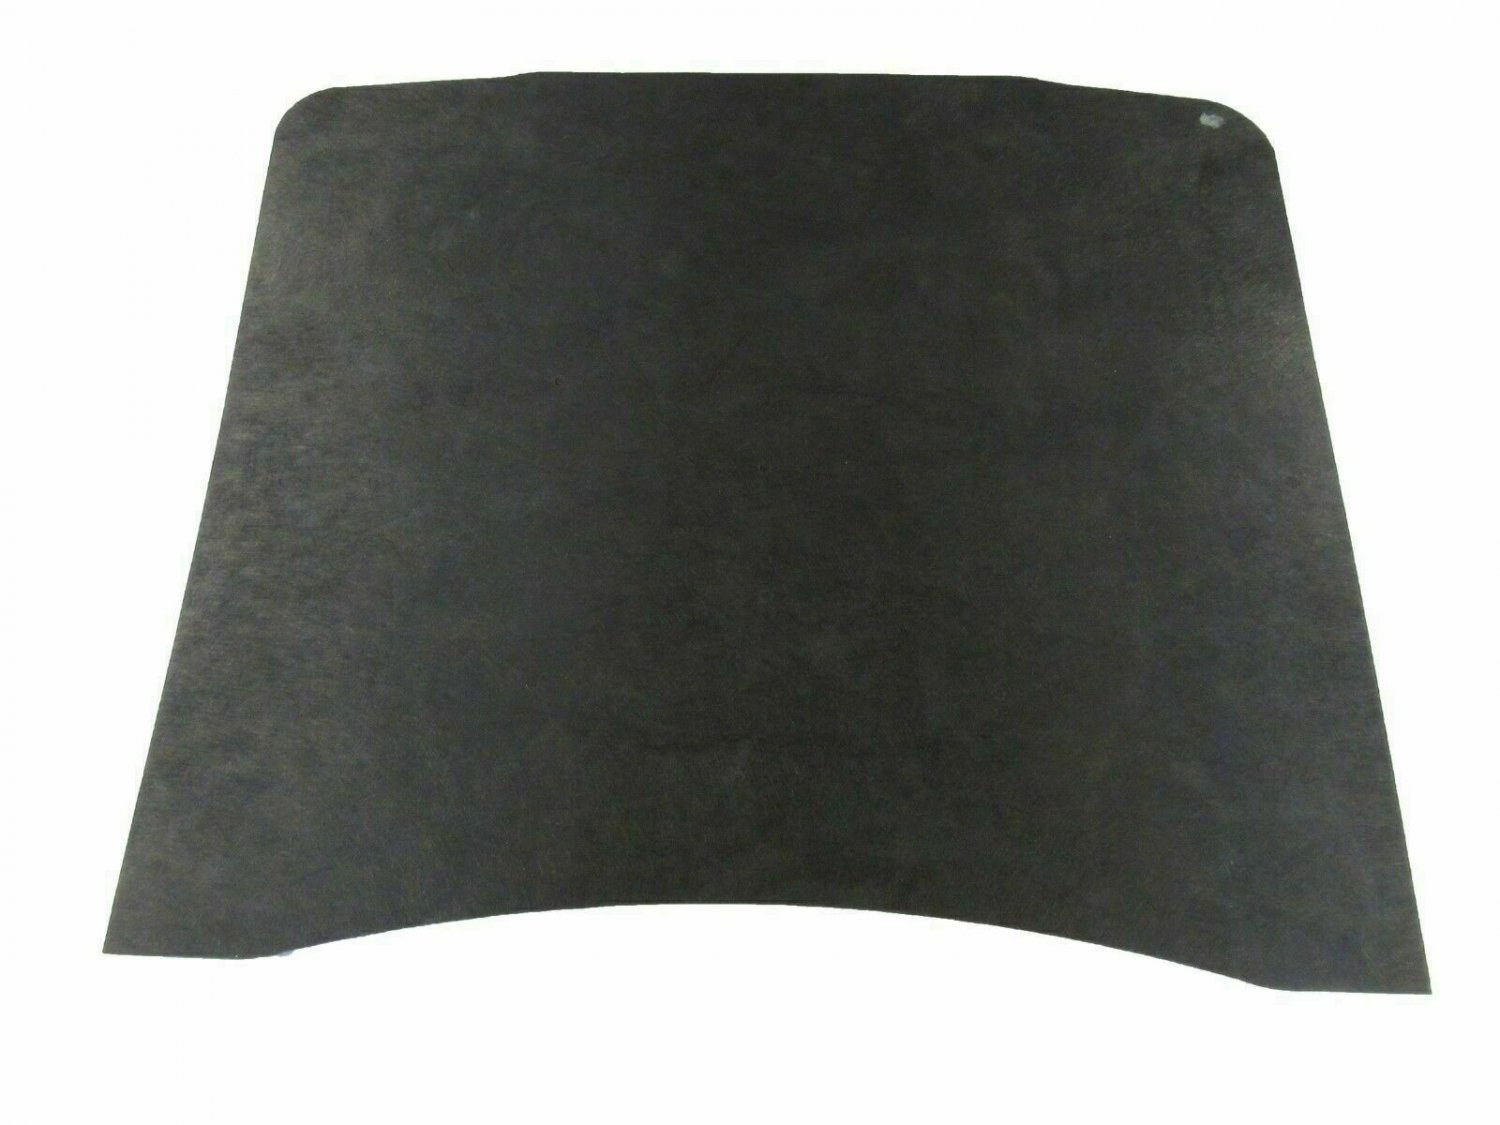 1982-1987 LINCOLN CONTINENTAL HOOD INSULATION PAD